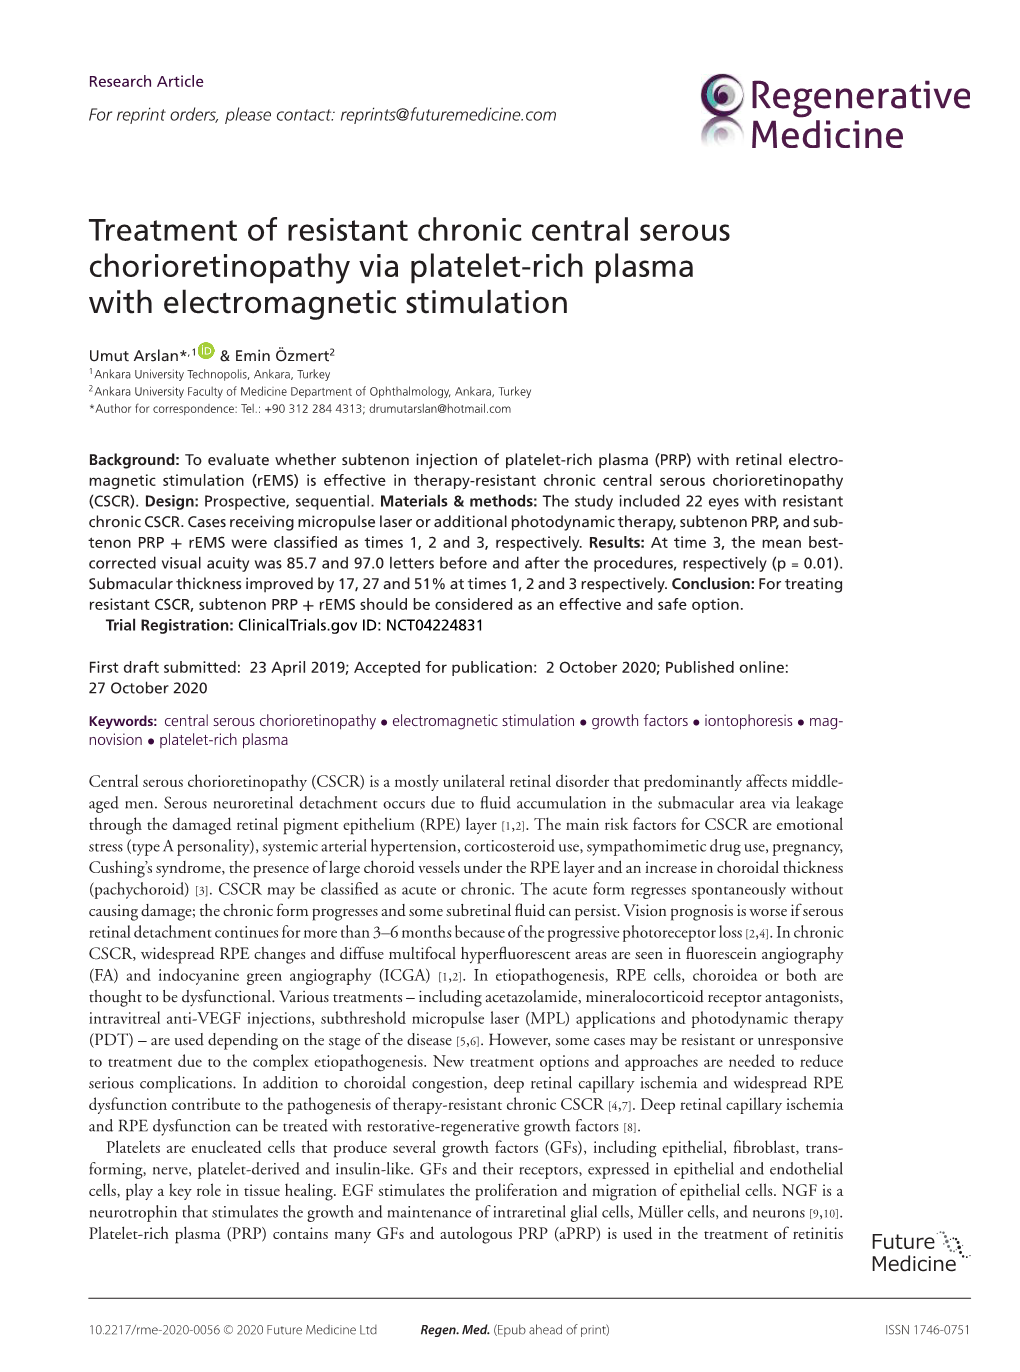 Treatment of Resistant Chronic Central Serous Chorioretinopathy Via Platelet-Rich Plasma with Electromagnetic Stimulation